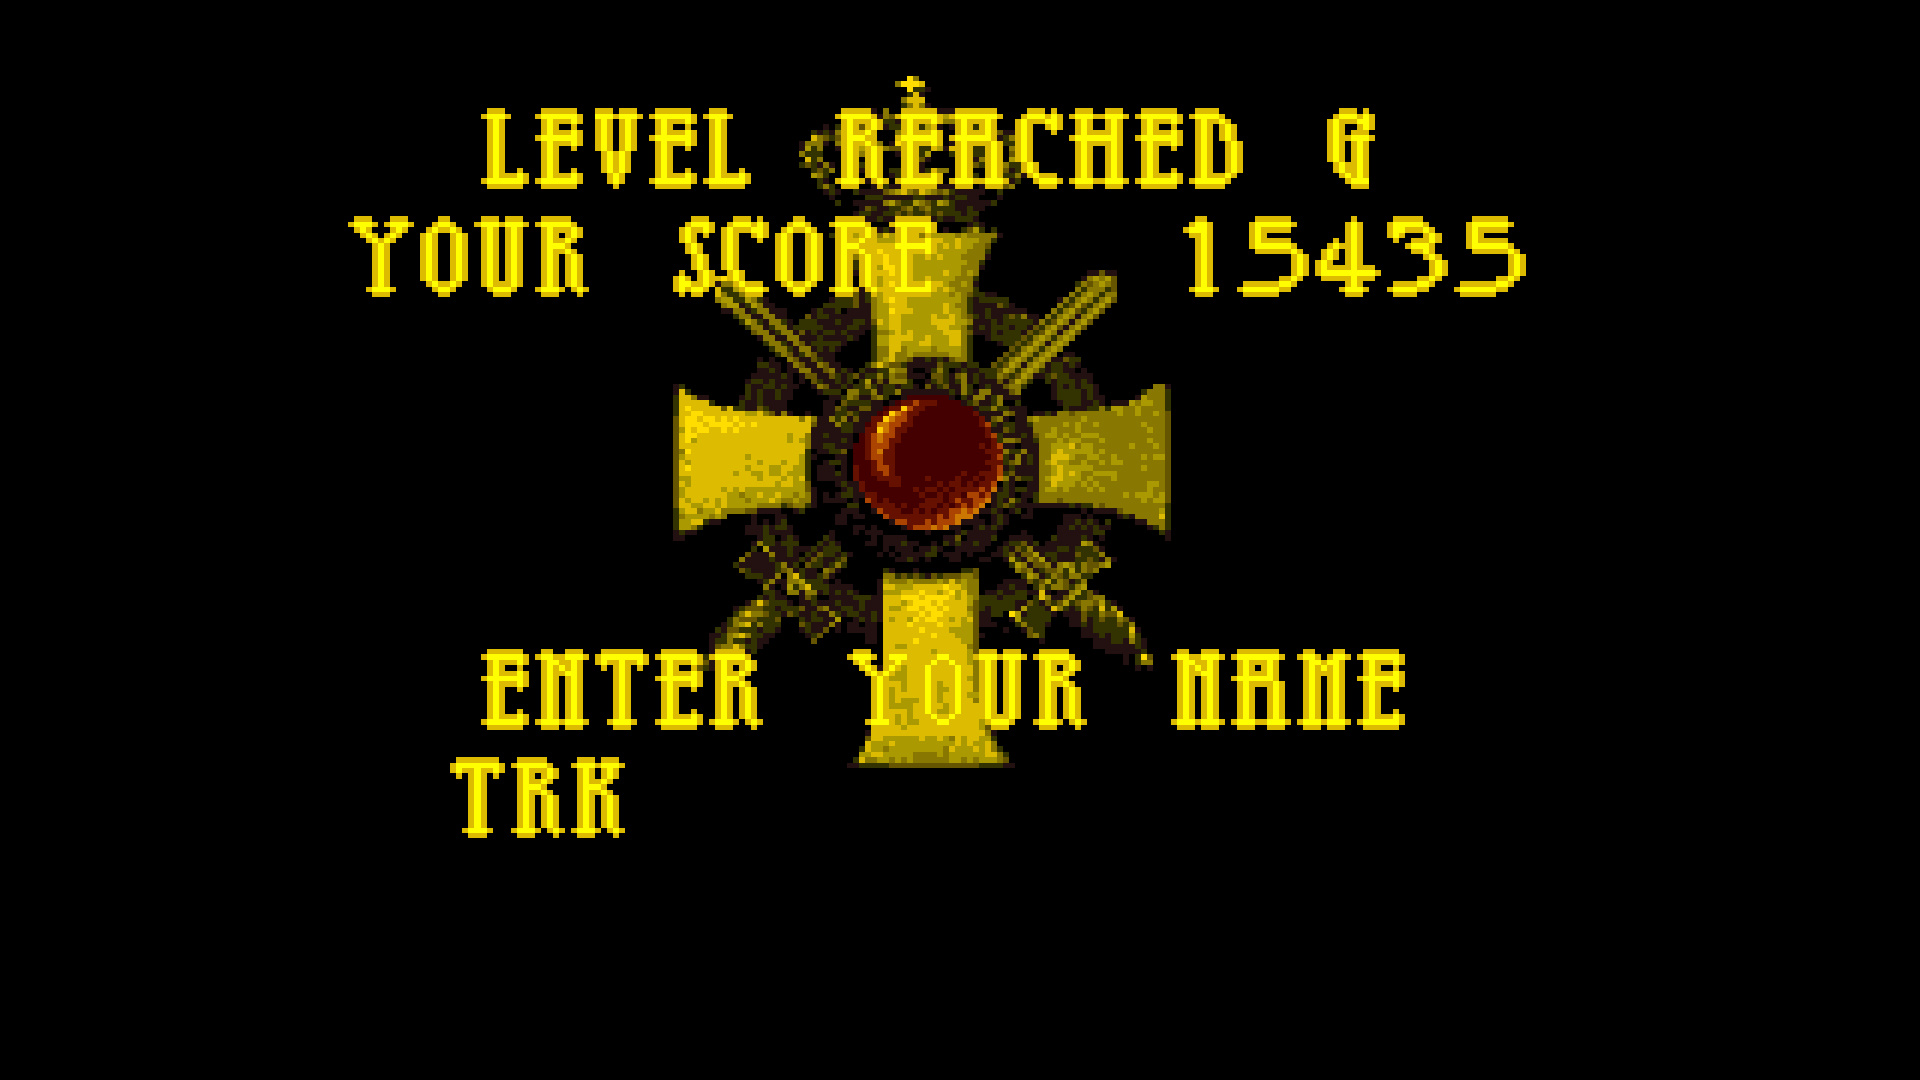 TheTrickster: TwinWorld: Land of Vision (Amiga Emulated) 15,435 points on 2015-08-13 05:26:14